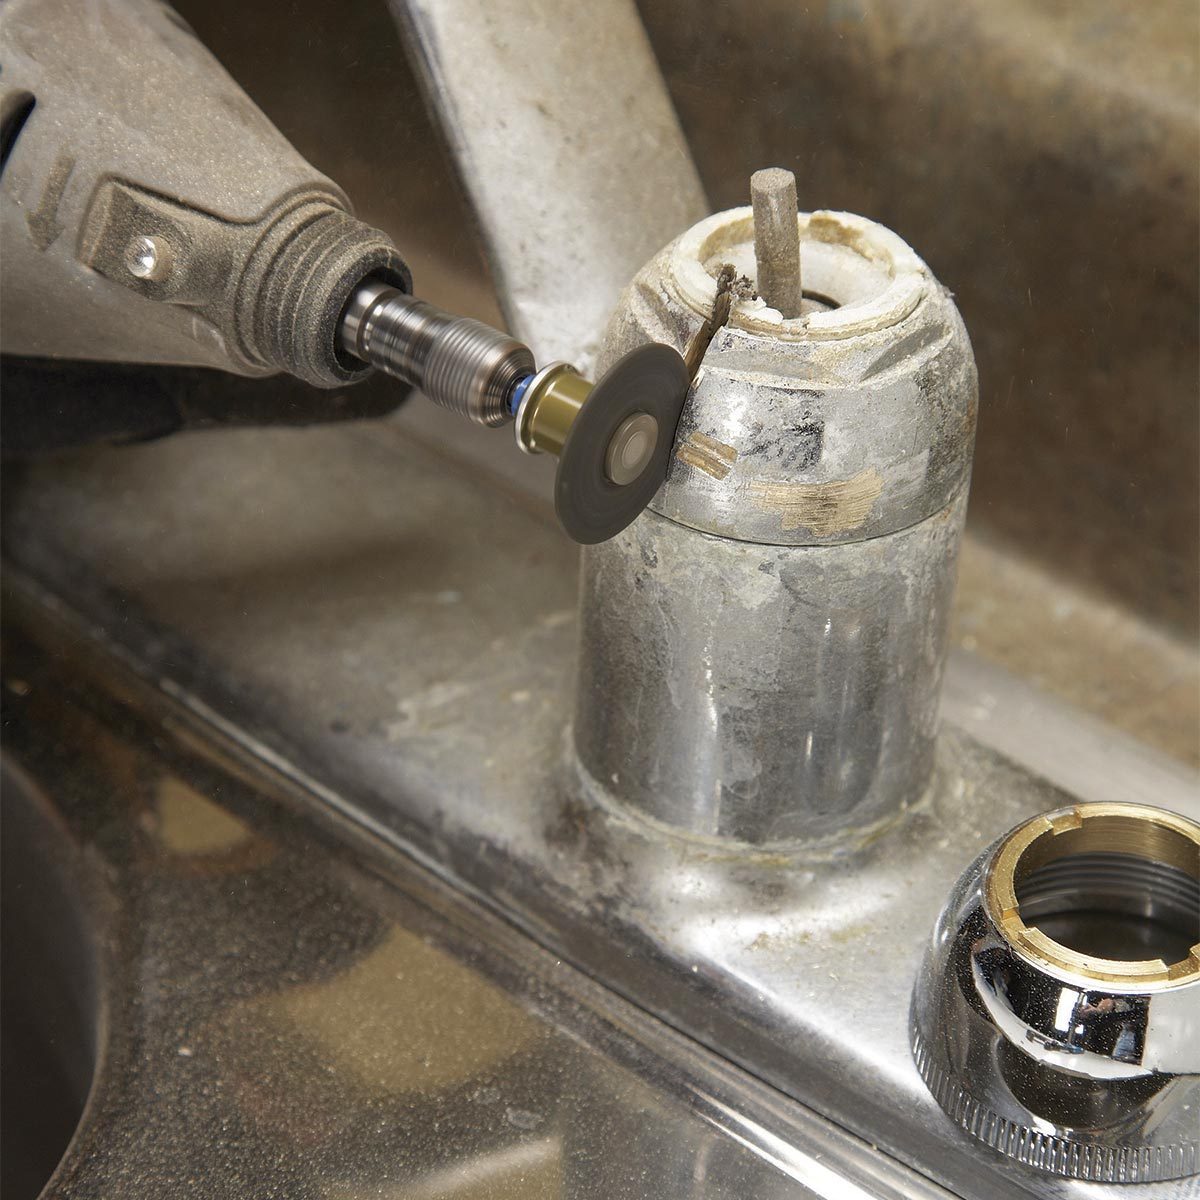 15 Ways To Maximize The Use Of Your Rotary Tool